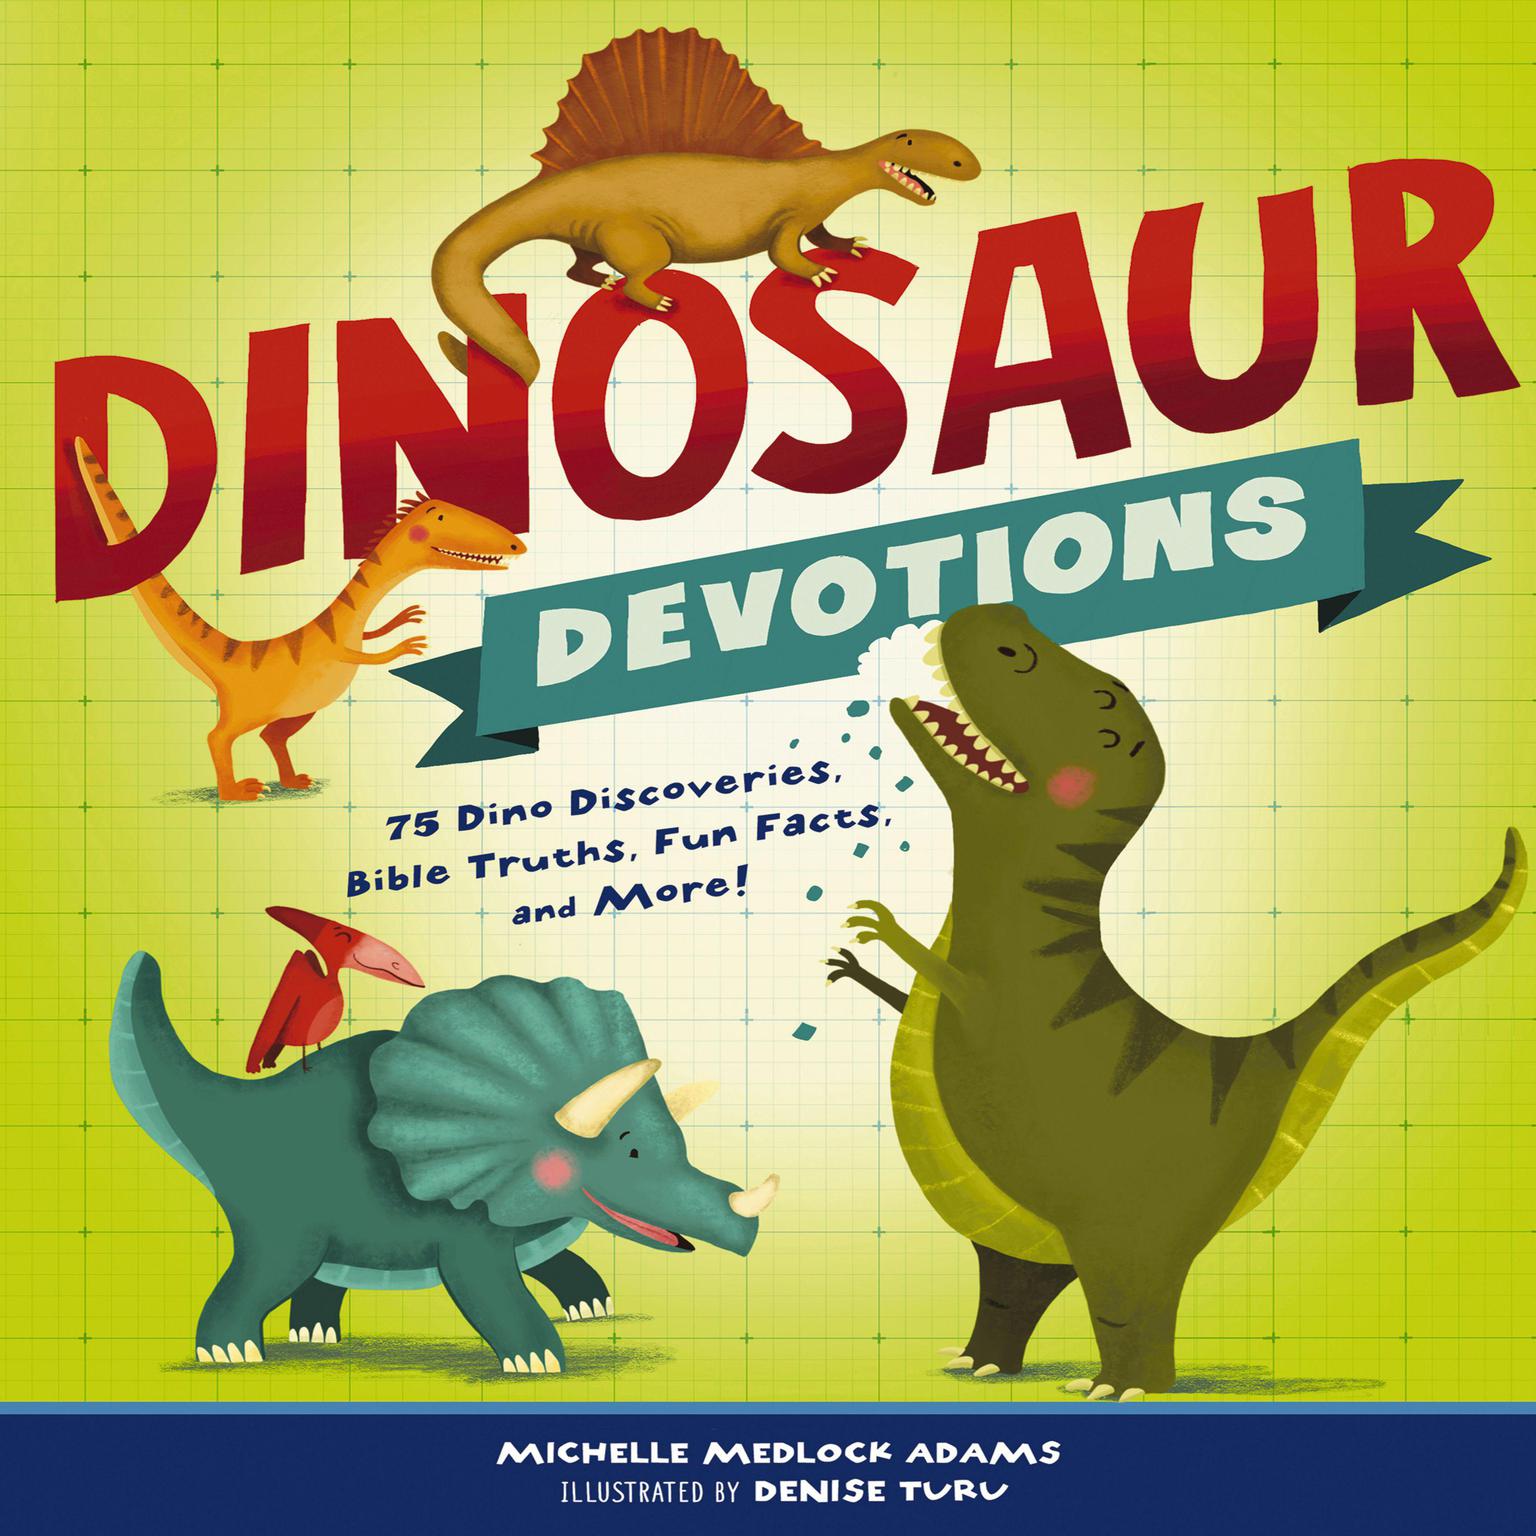 Dinosaur Devotions: 75 Dino Discoveries, Bible Truths, Fun Facts, and More! Audiobook, by Michelle Medlock Adams